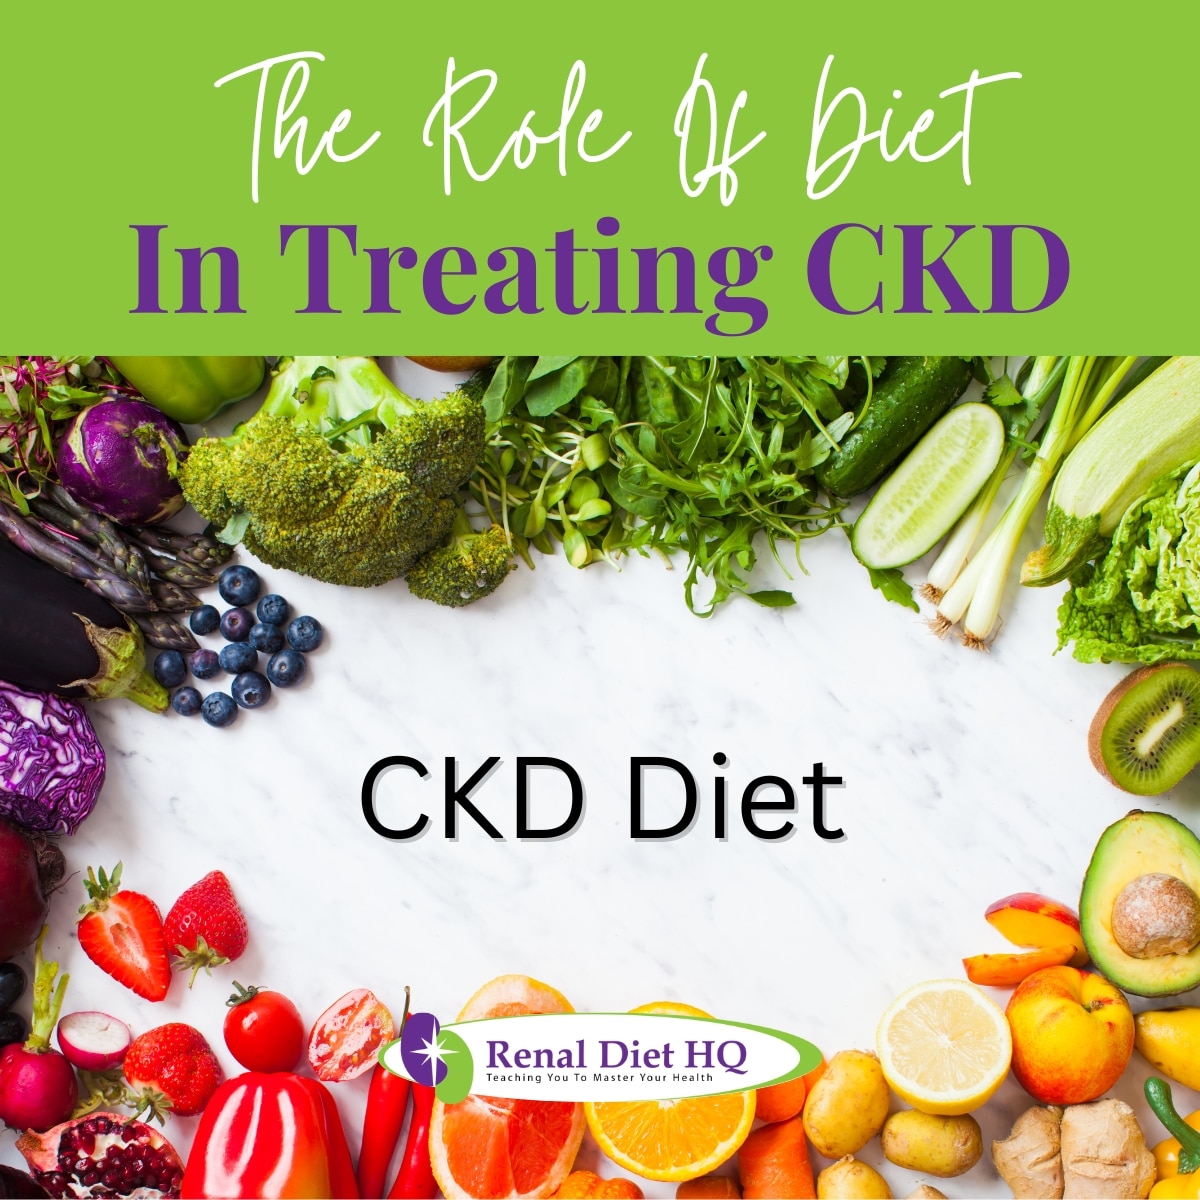 Rainbow Colored Fruits and Vegetables - Diet for CKD